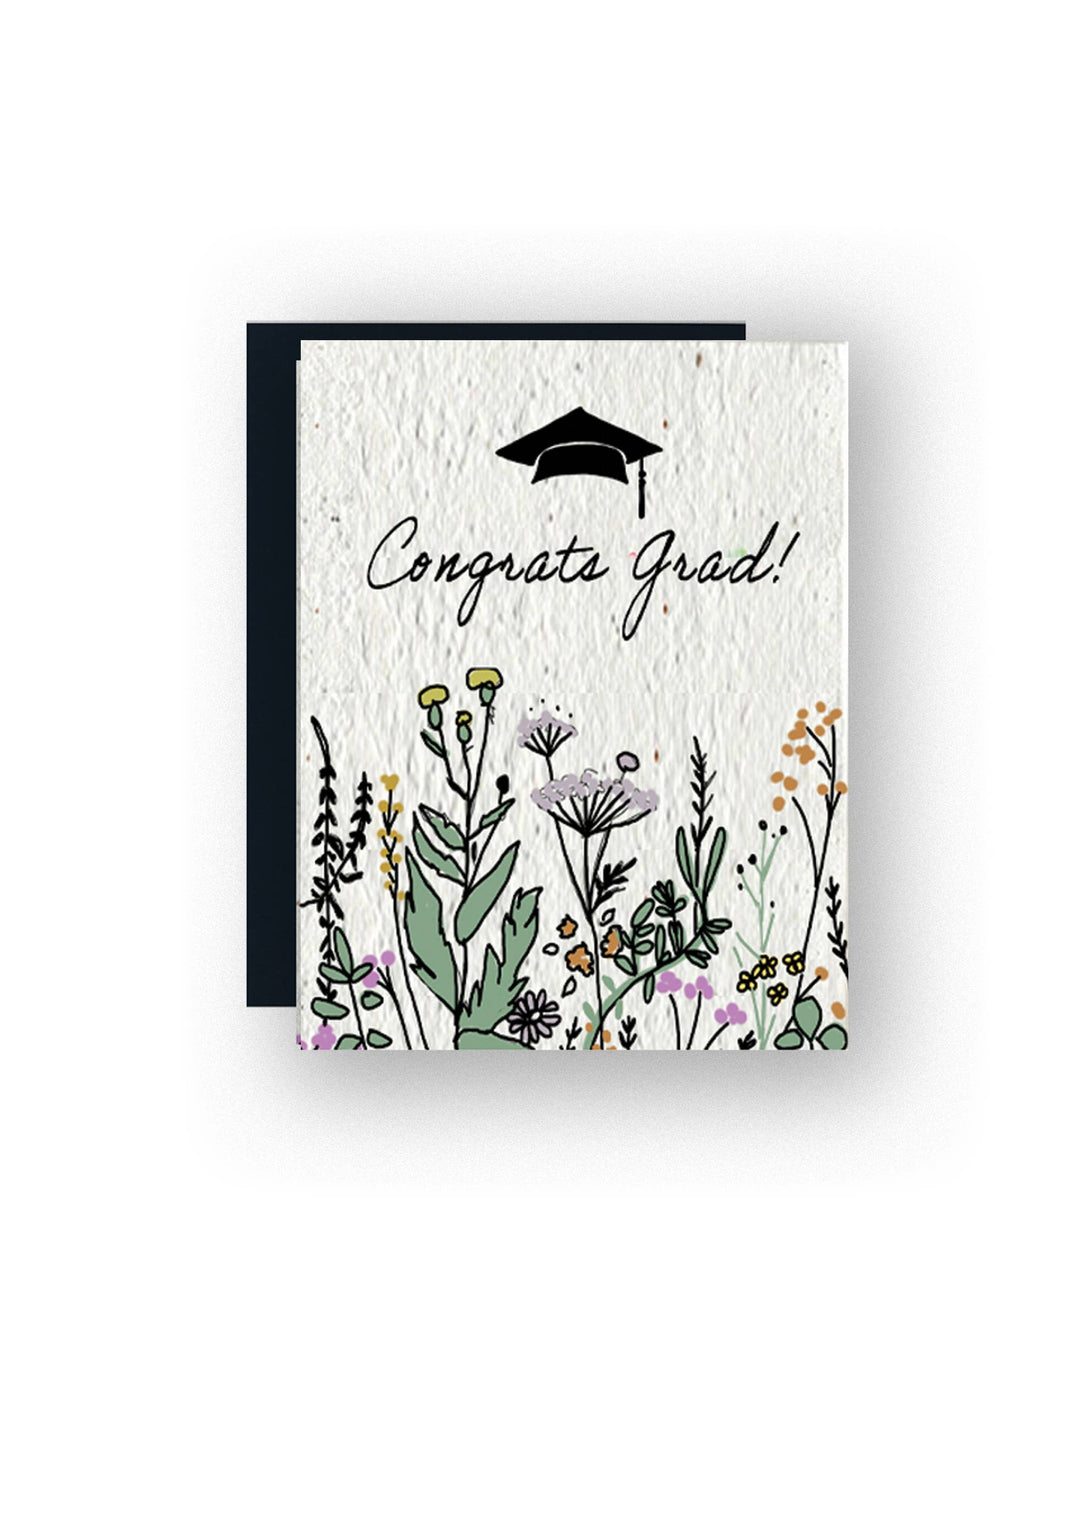 Congrats Grad! Wildflower Seed Paper Greeting Card - Pine & Moss